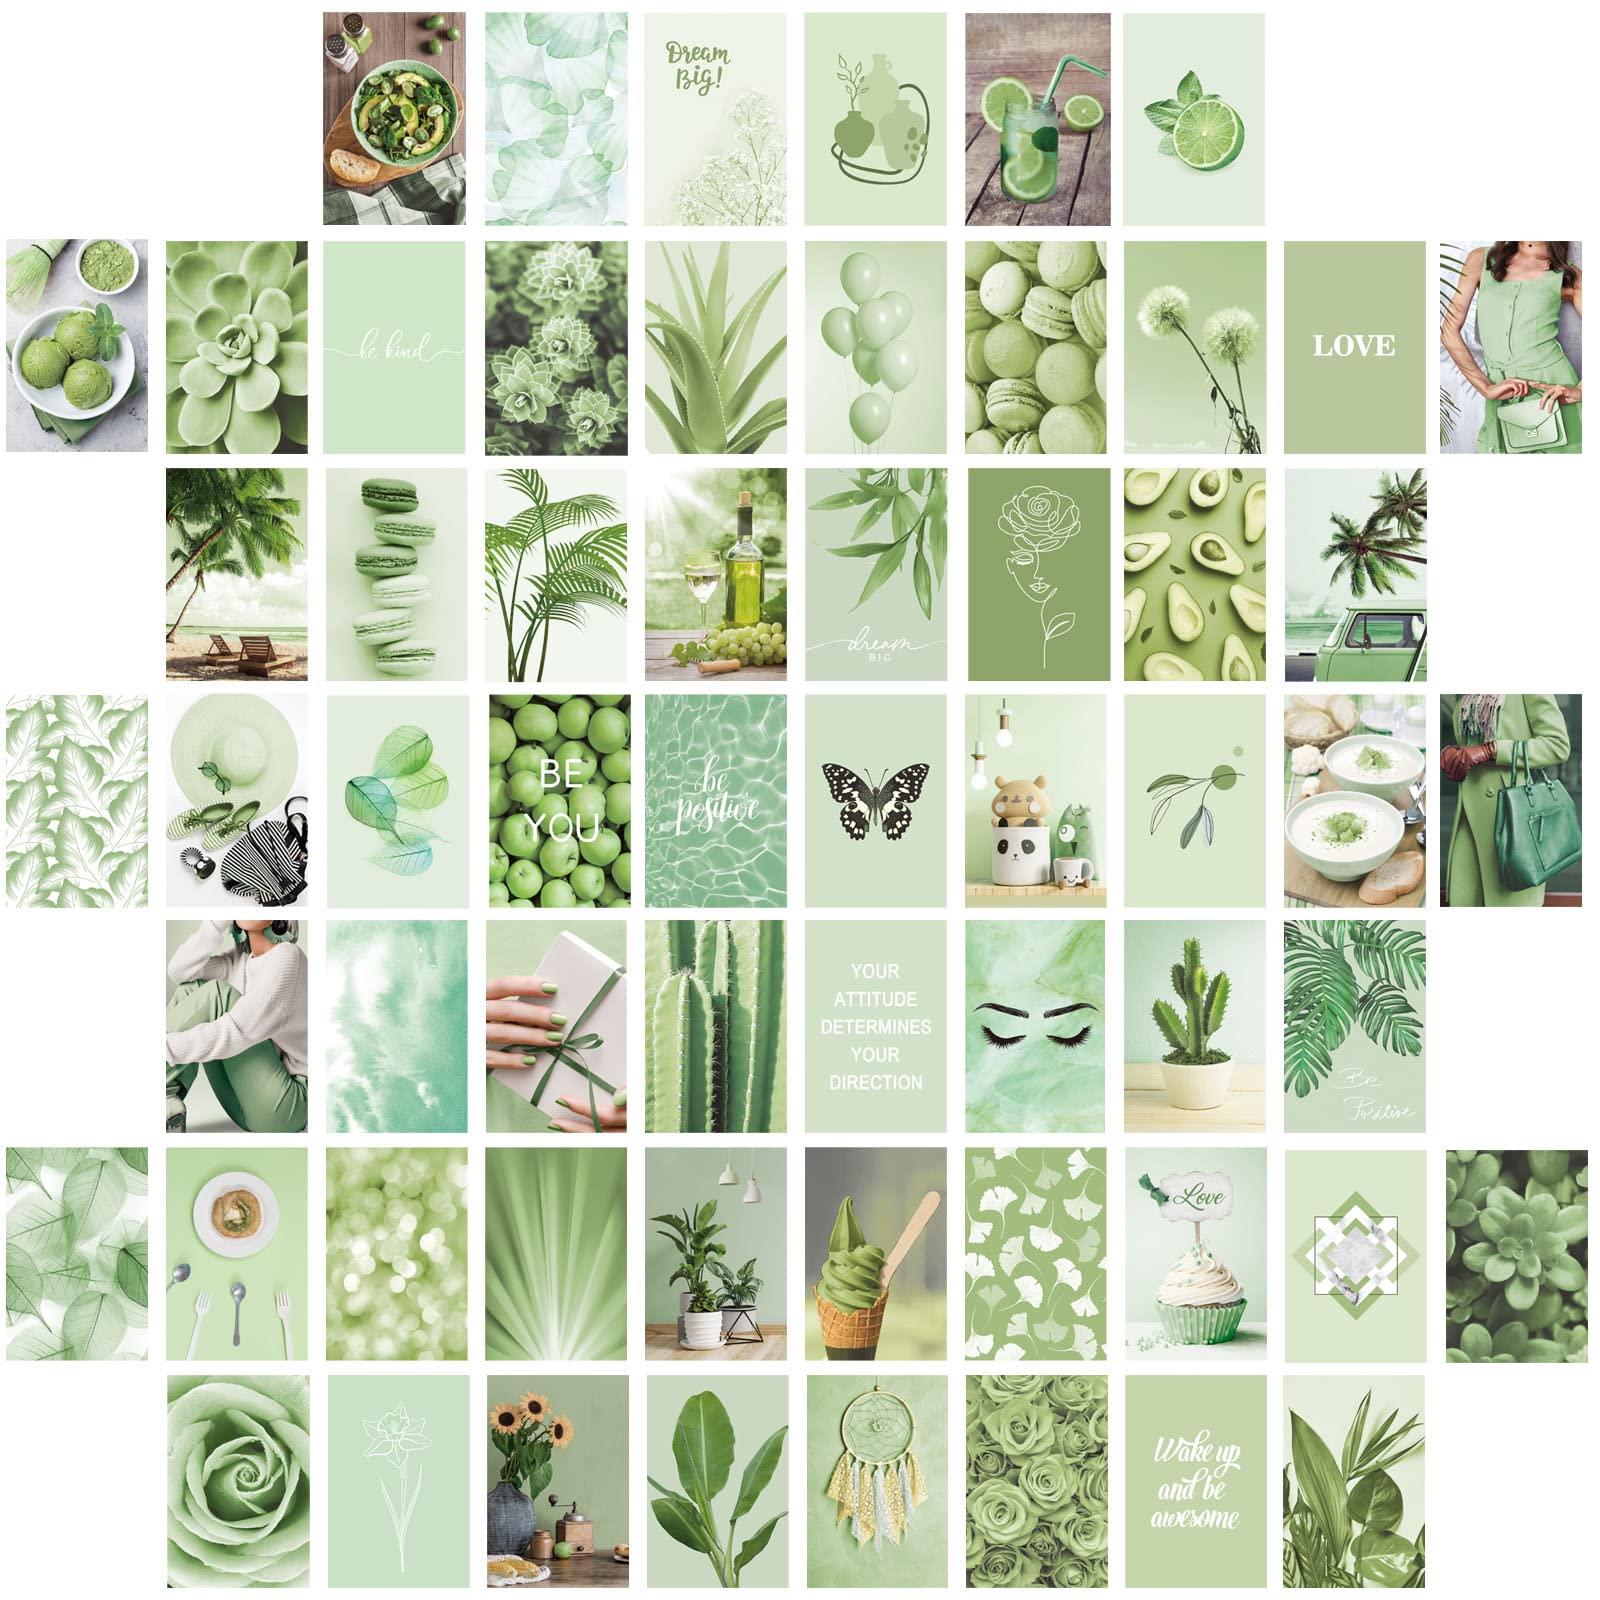 A collage of green plants and flowers - Sage green, lime green